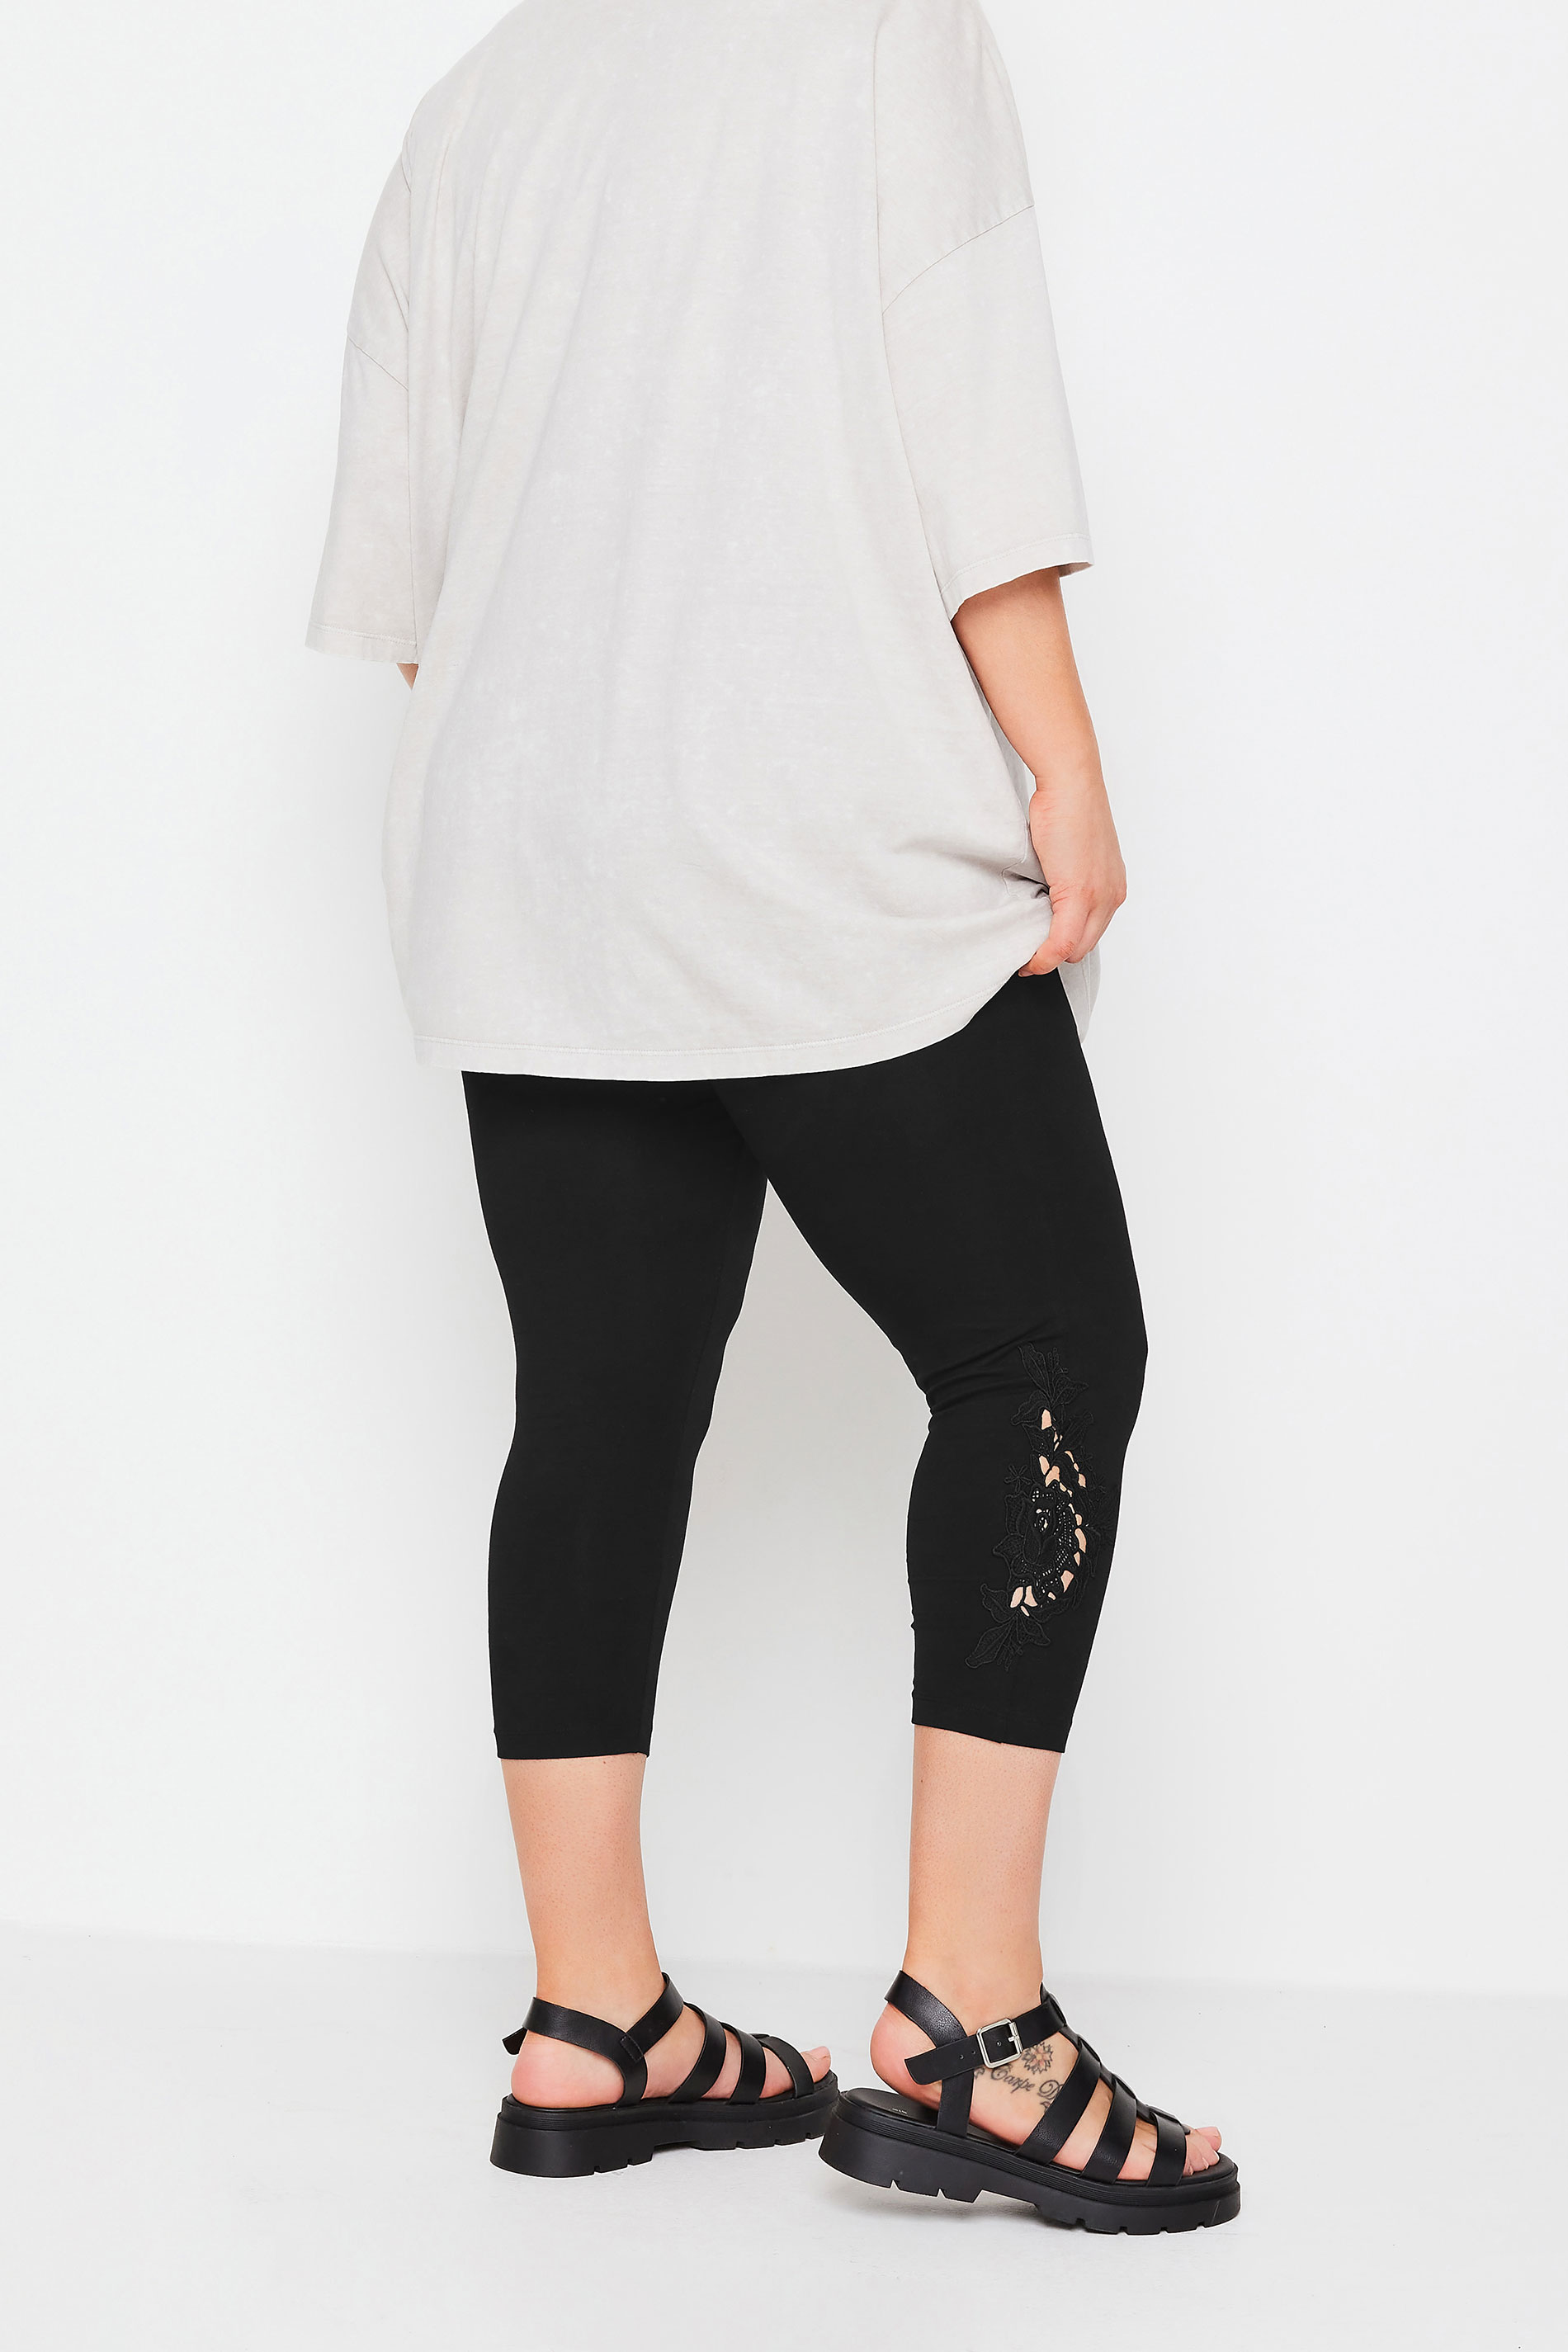 Plus Size Black Lace Cropped Leggings | Yours Clothing 3